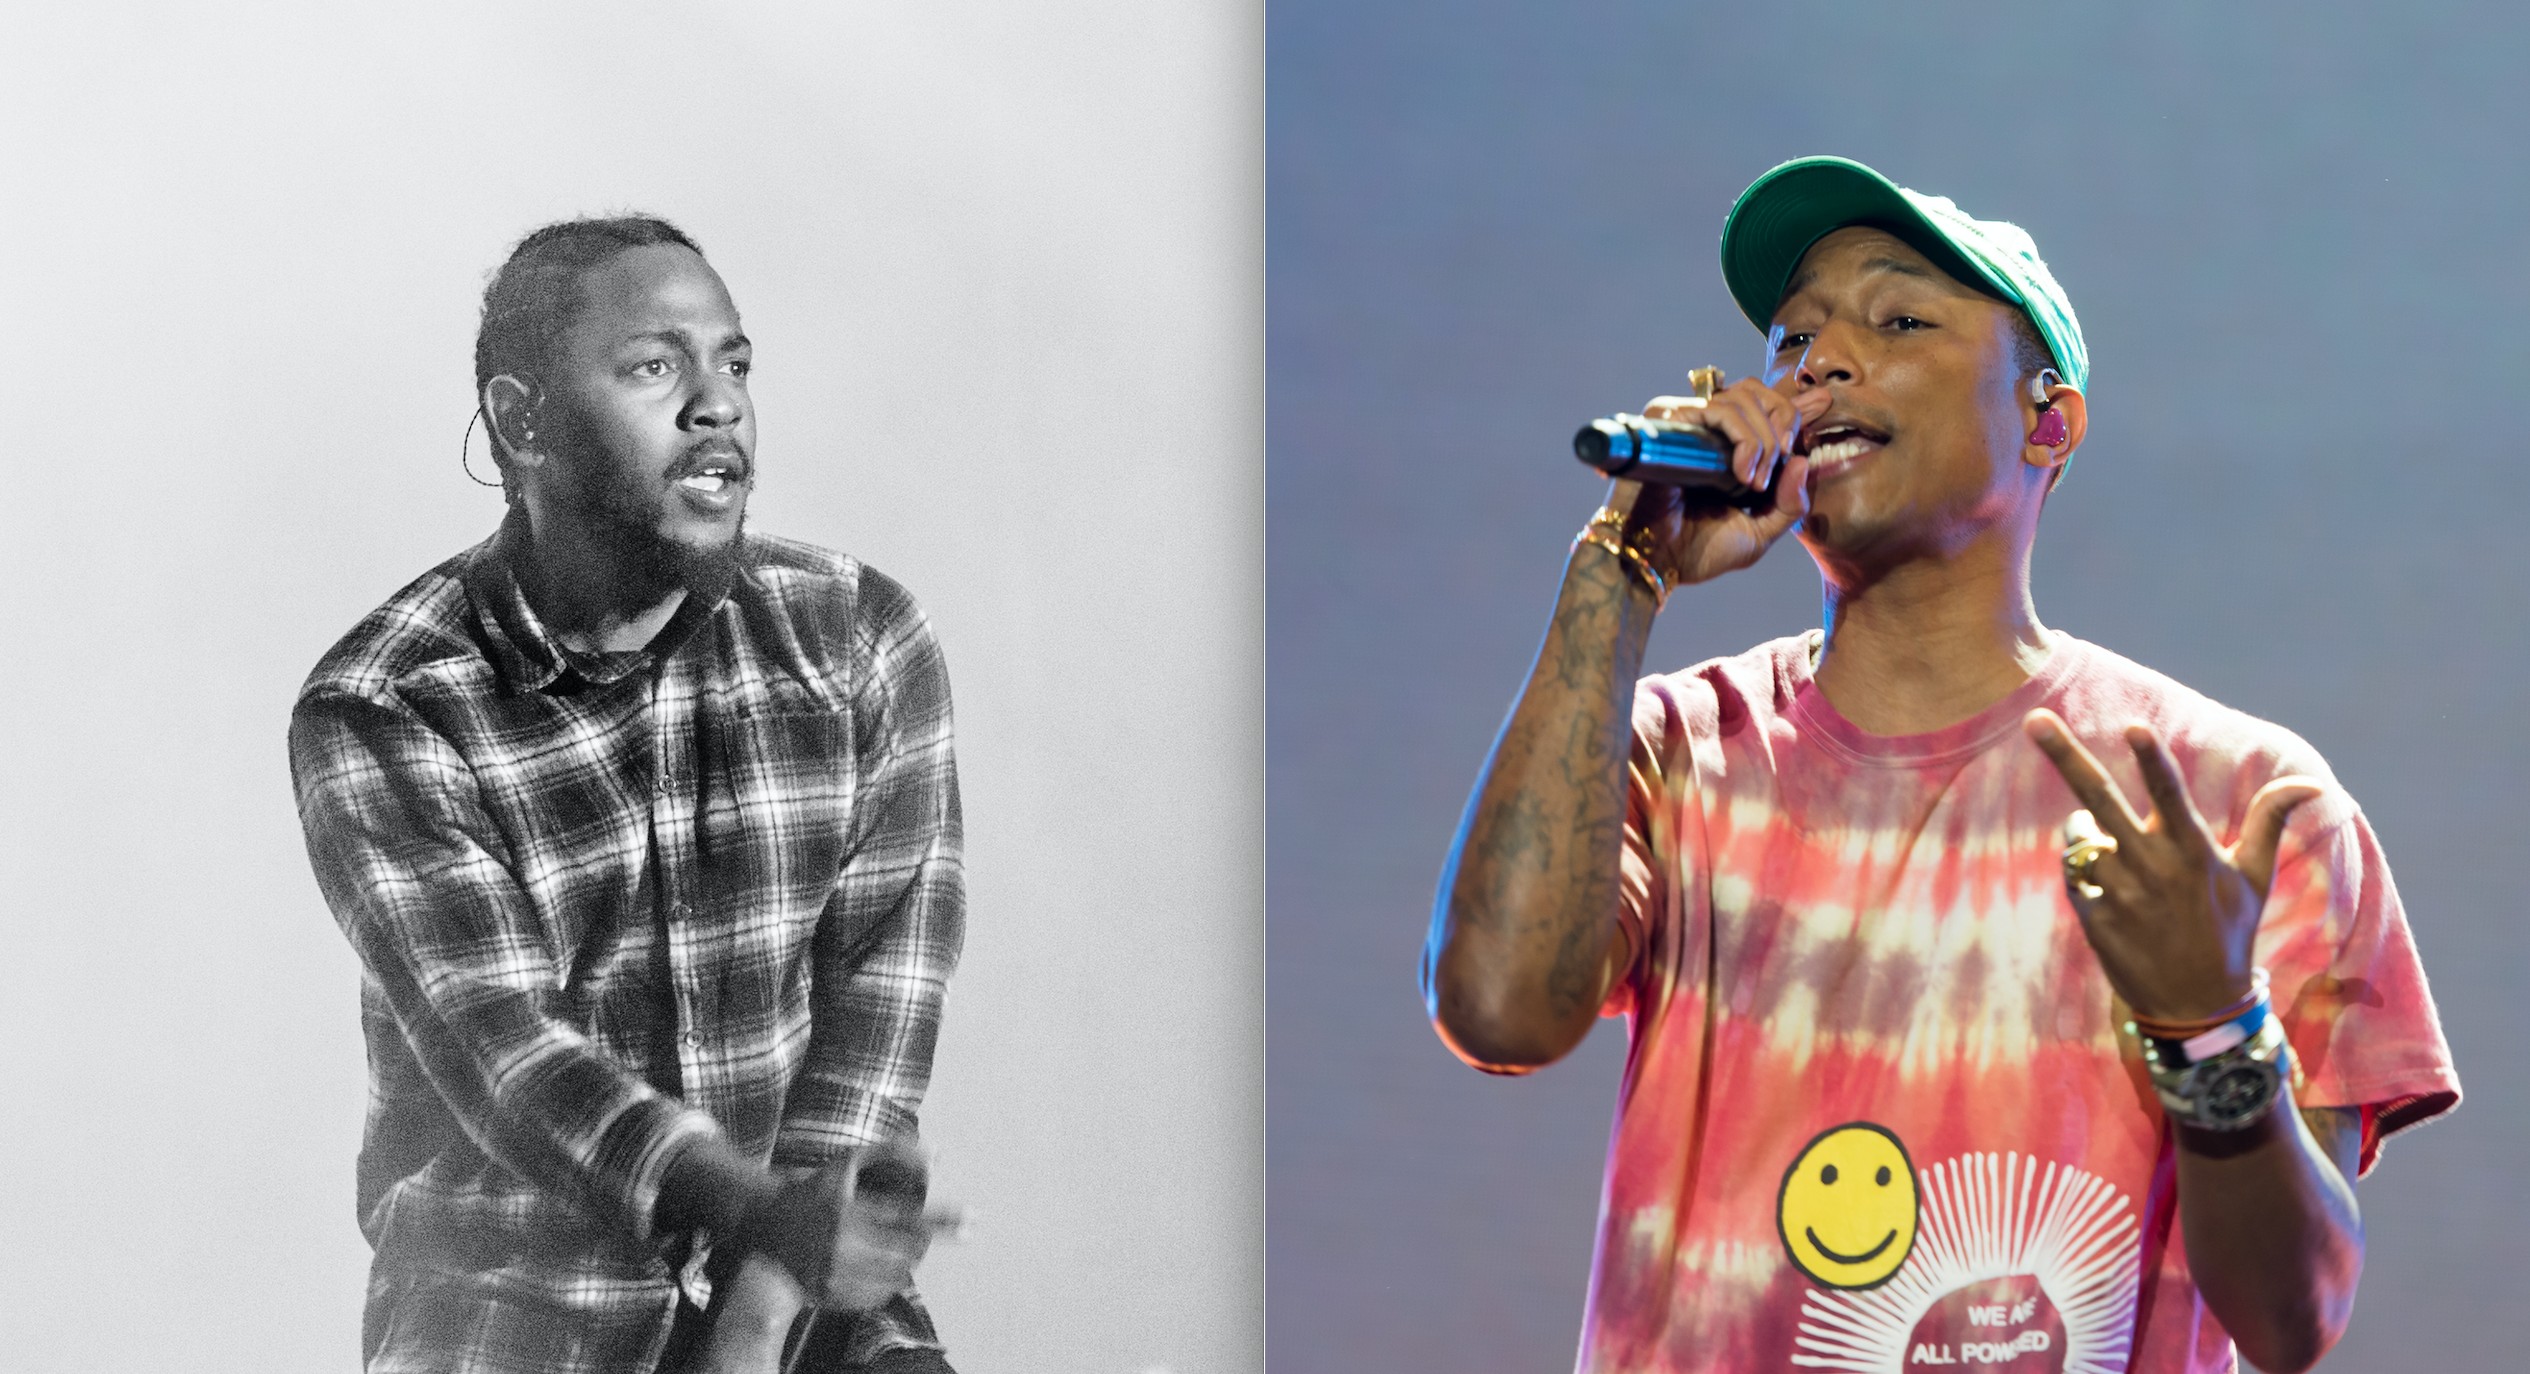 Frank Ocean and Kendrick Lamar Collaborate With N.E.R.D on New Song: Listen